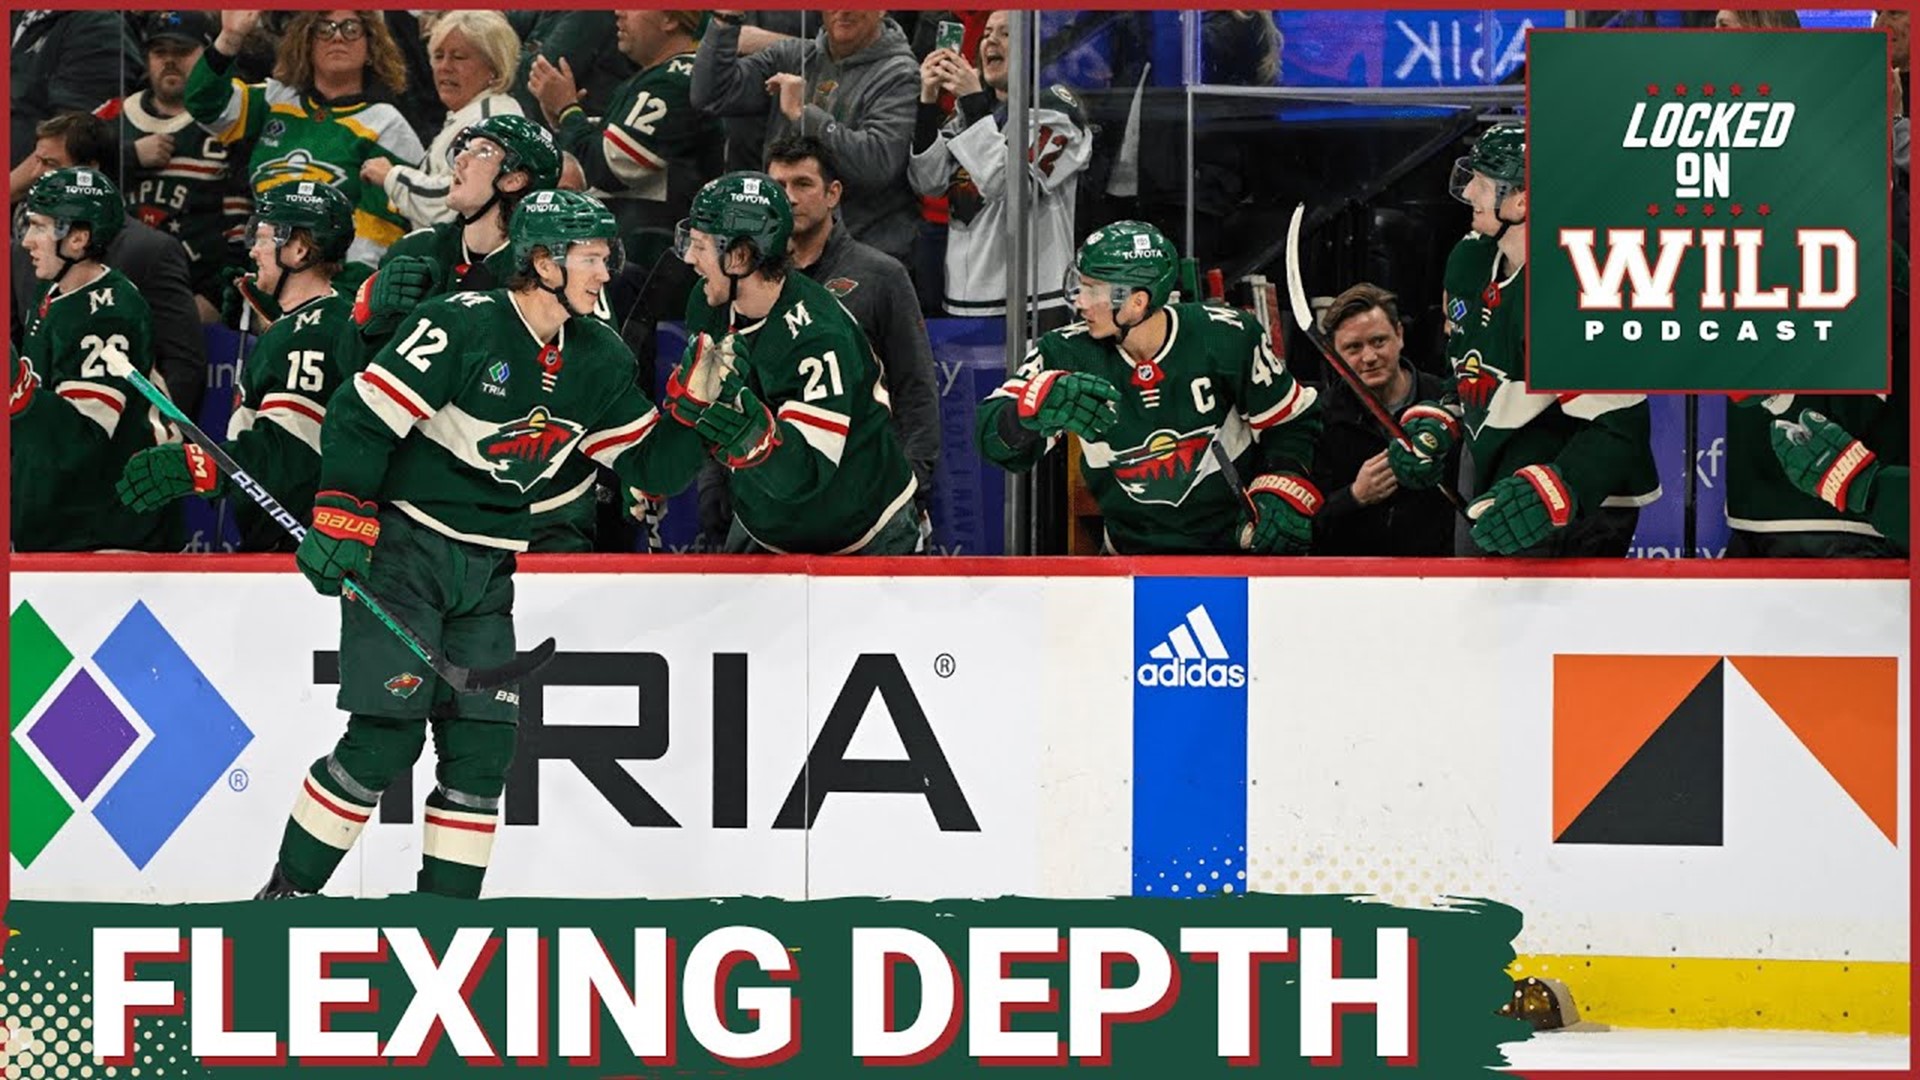 Minnesota Wild Continue to Flex their Lineup Depth With Each Win